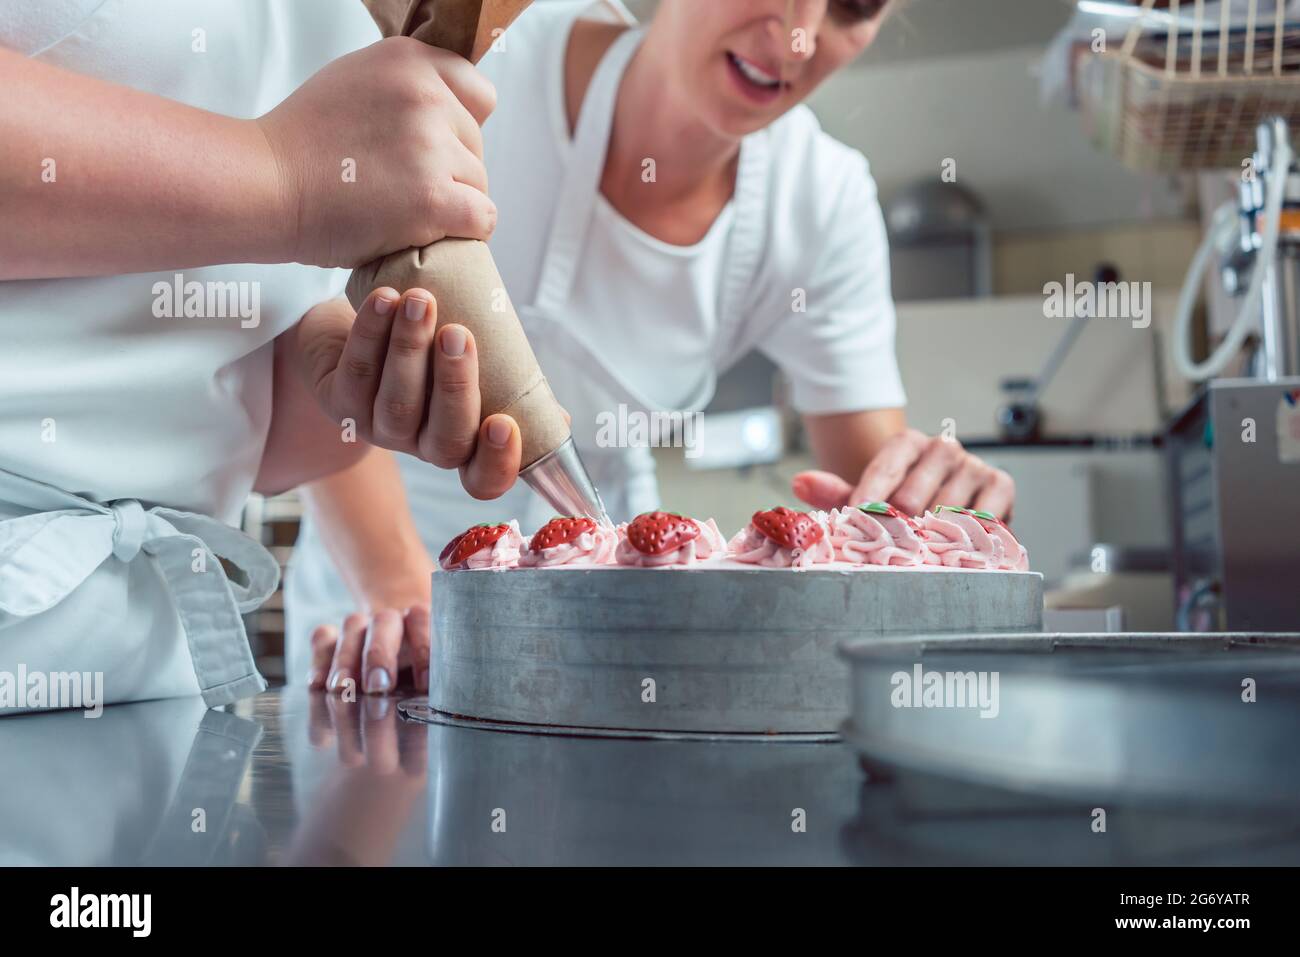 https://c8.alamy.com/comp/2G6YATR/confectioner-or-pastry-chefs-finishing-cake-with-pastry-bag-close-up-on-hands-2G6YATR.jpg